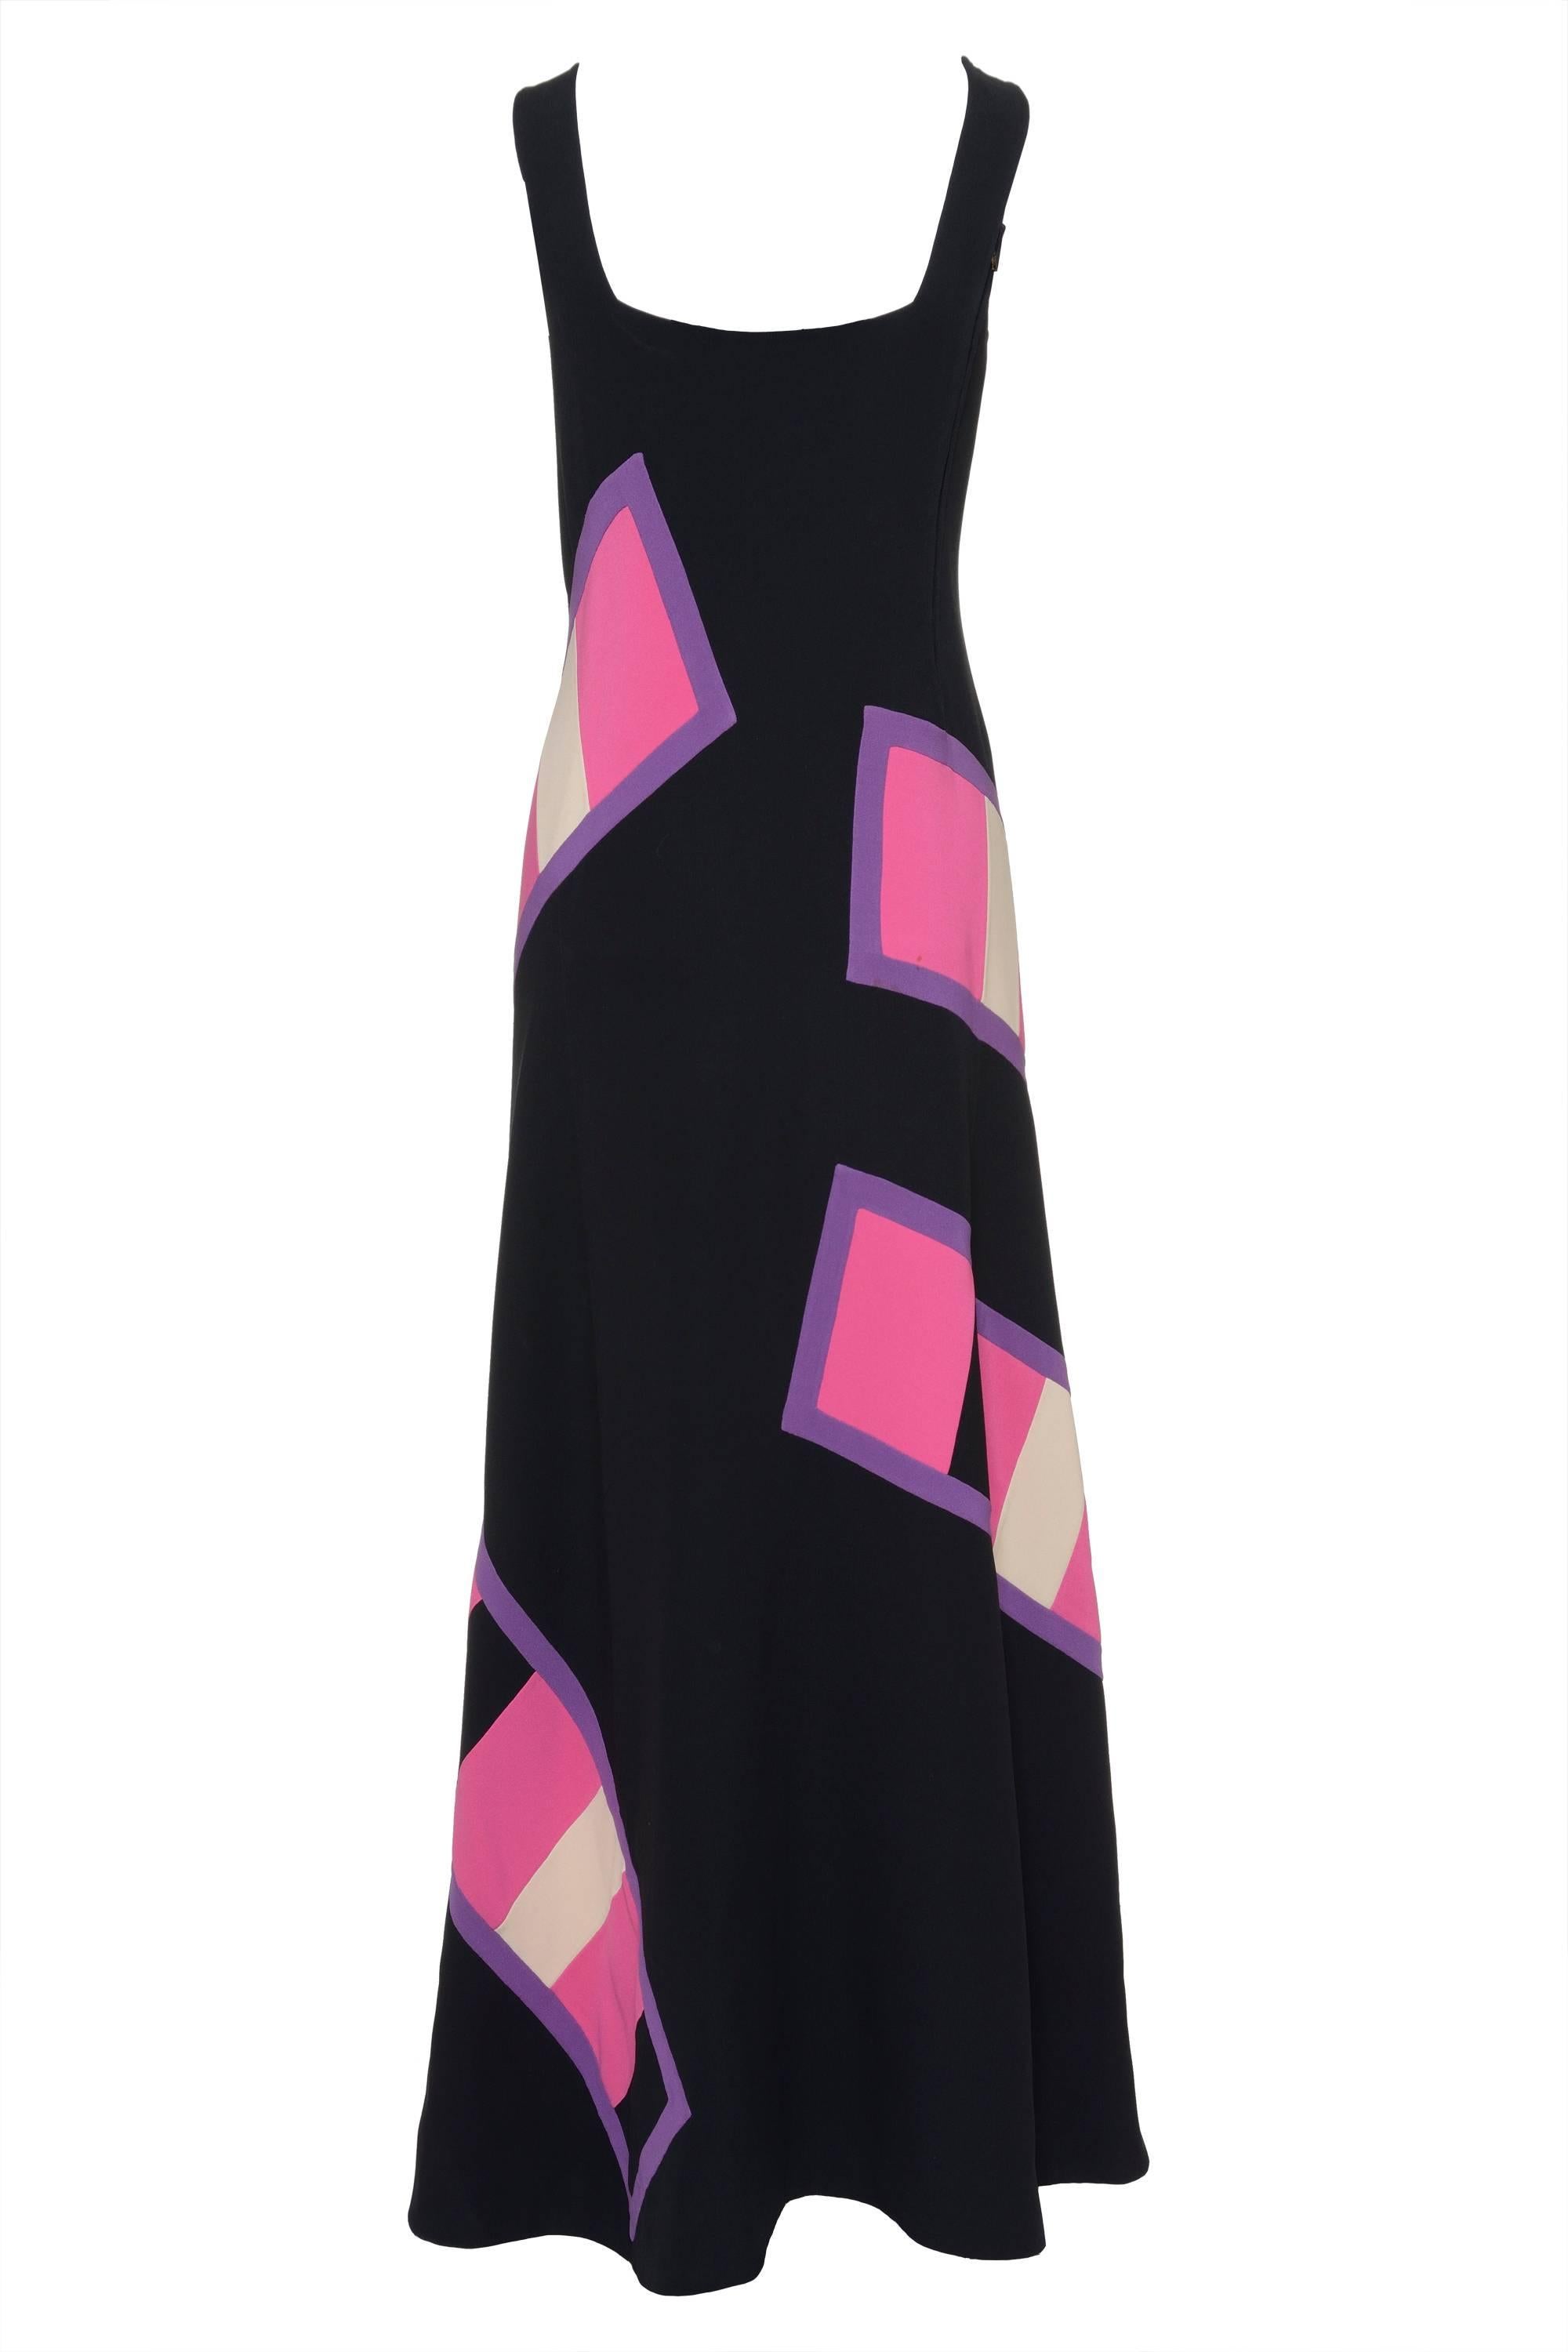 This lovely 1970s Long Dress by MILA SCHÖN is Black with rectangular Patchwork details purple and white fuchsia pattern crossing, A-line skirt, front boat and back square neckline, armhole princess seams, with hook and eye closure on the shoulder,